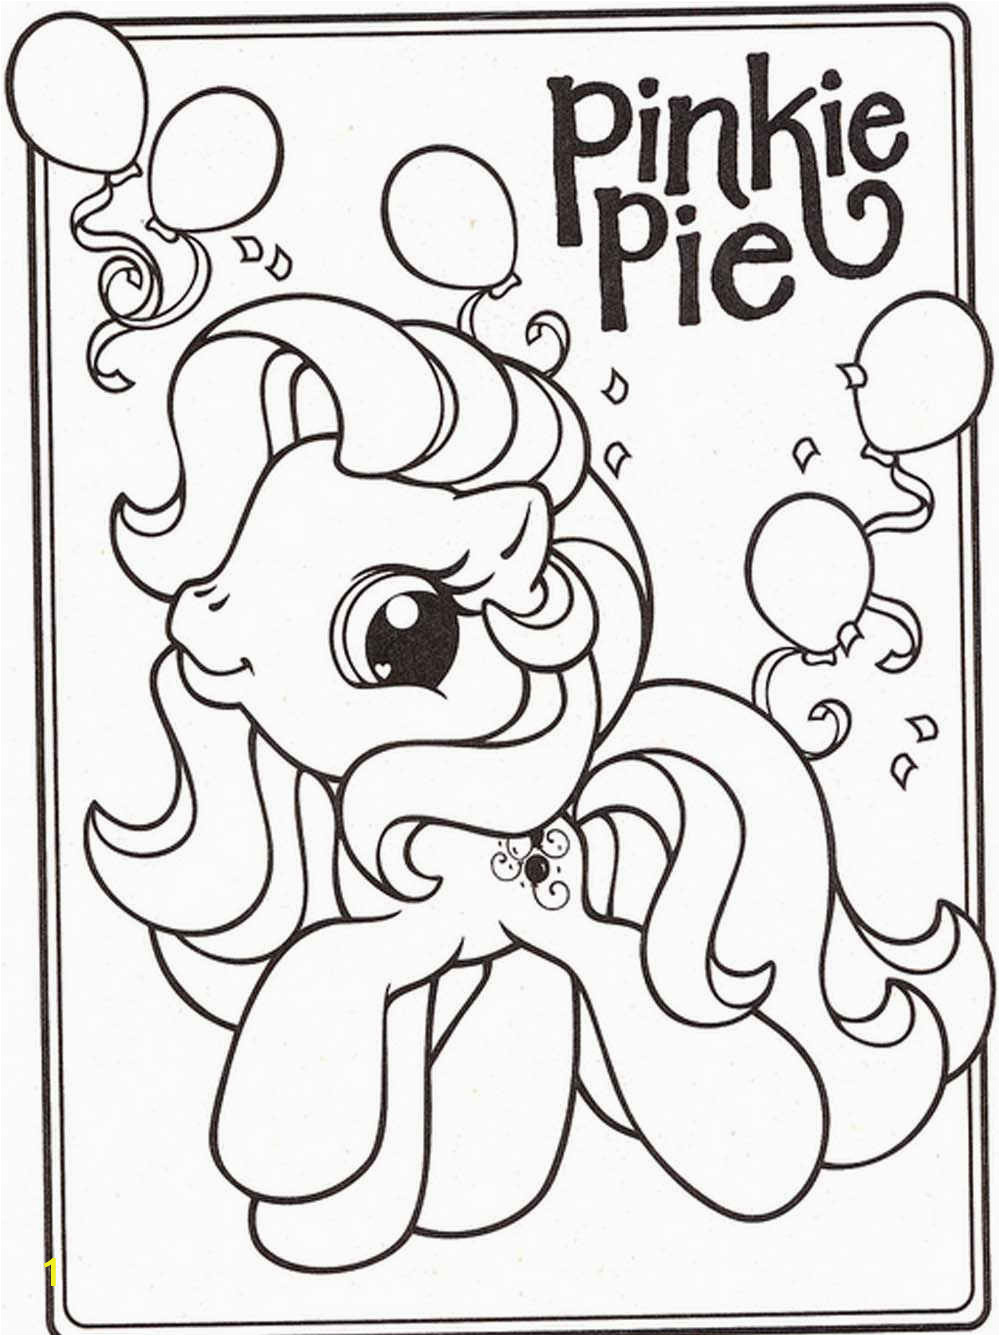 My Little Pony Coloring Pages Pinkie Pie My Little Pony Pinkie Pie Coloring Pages for Kids and